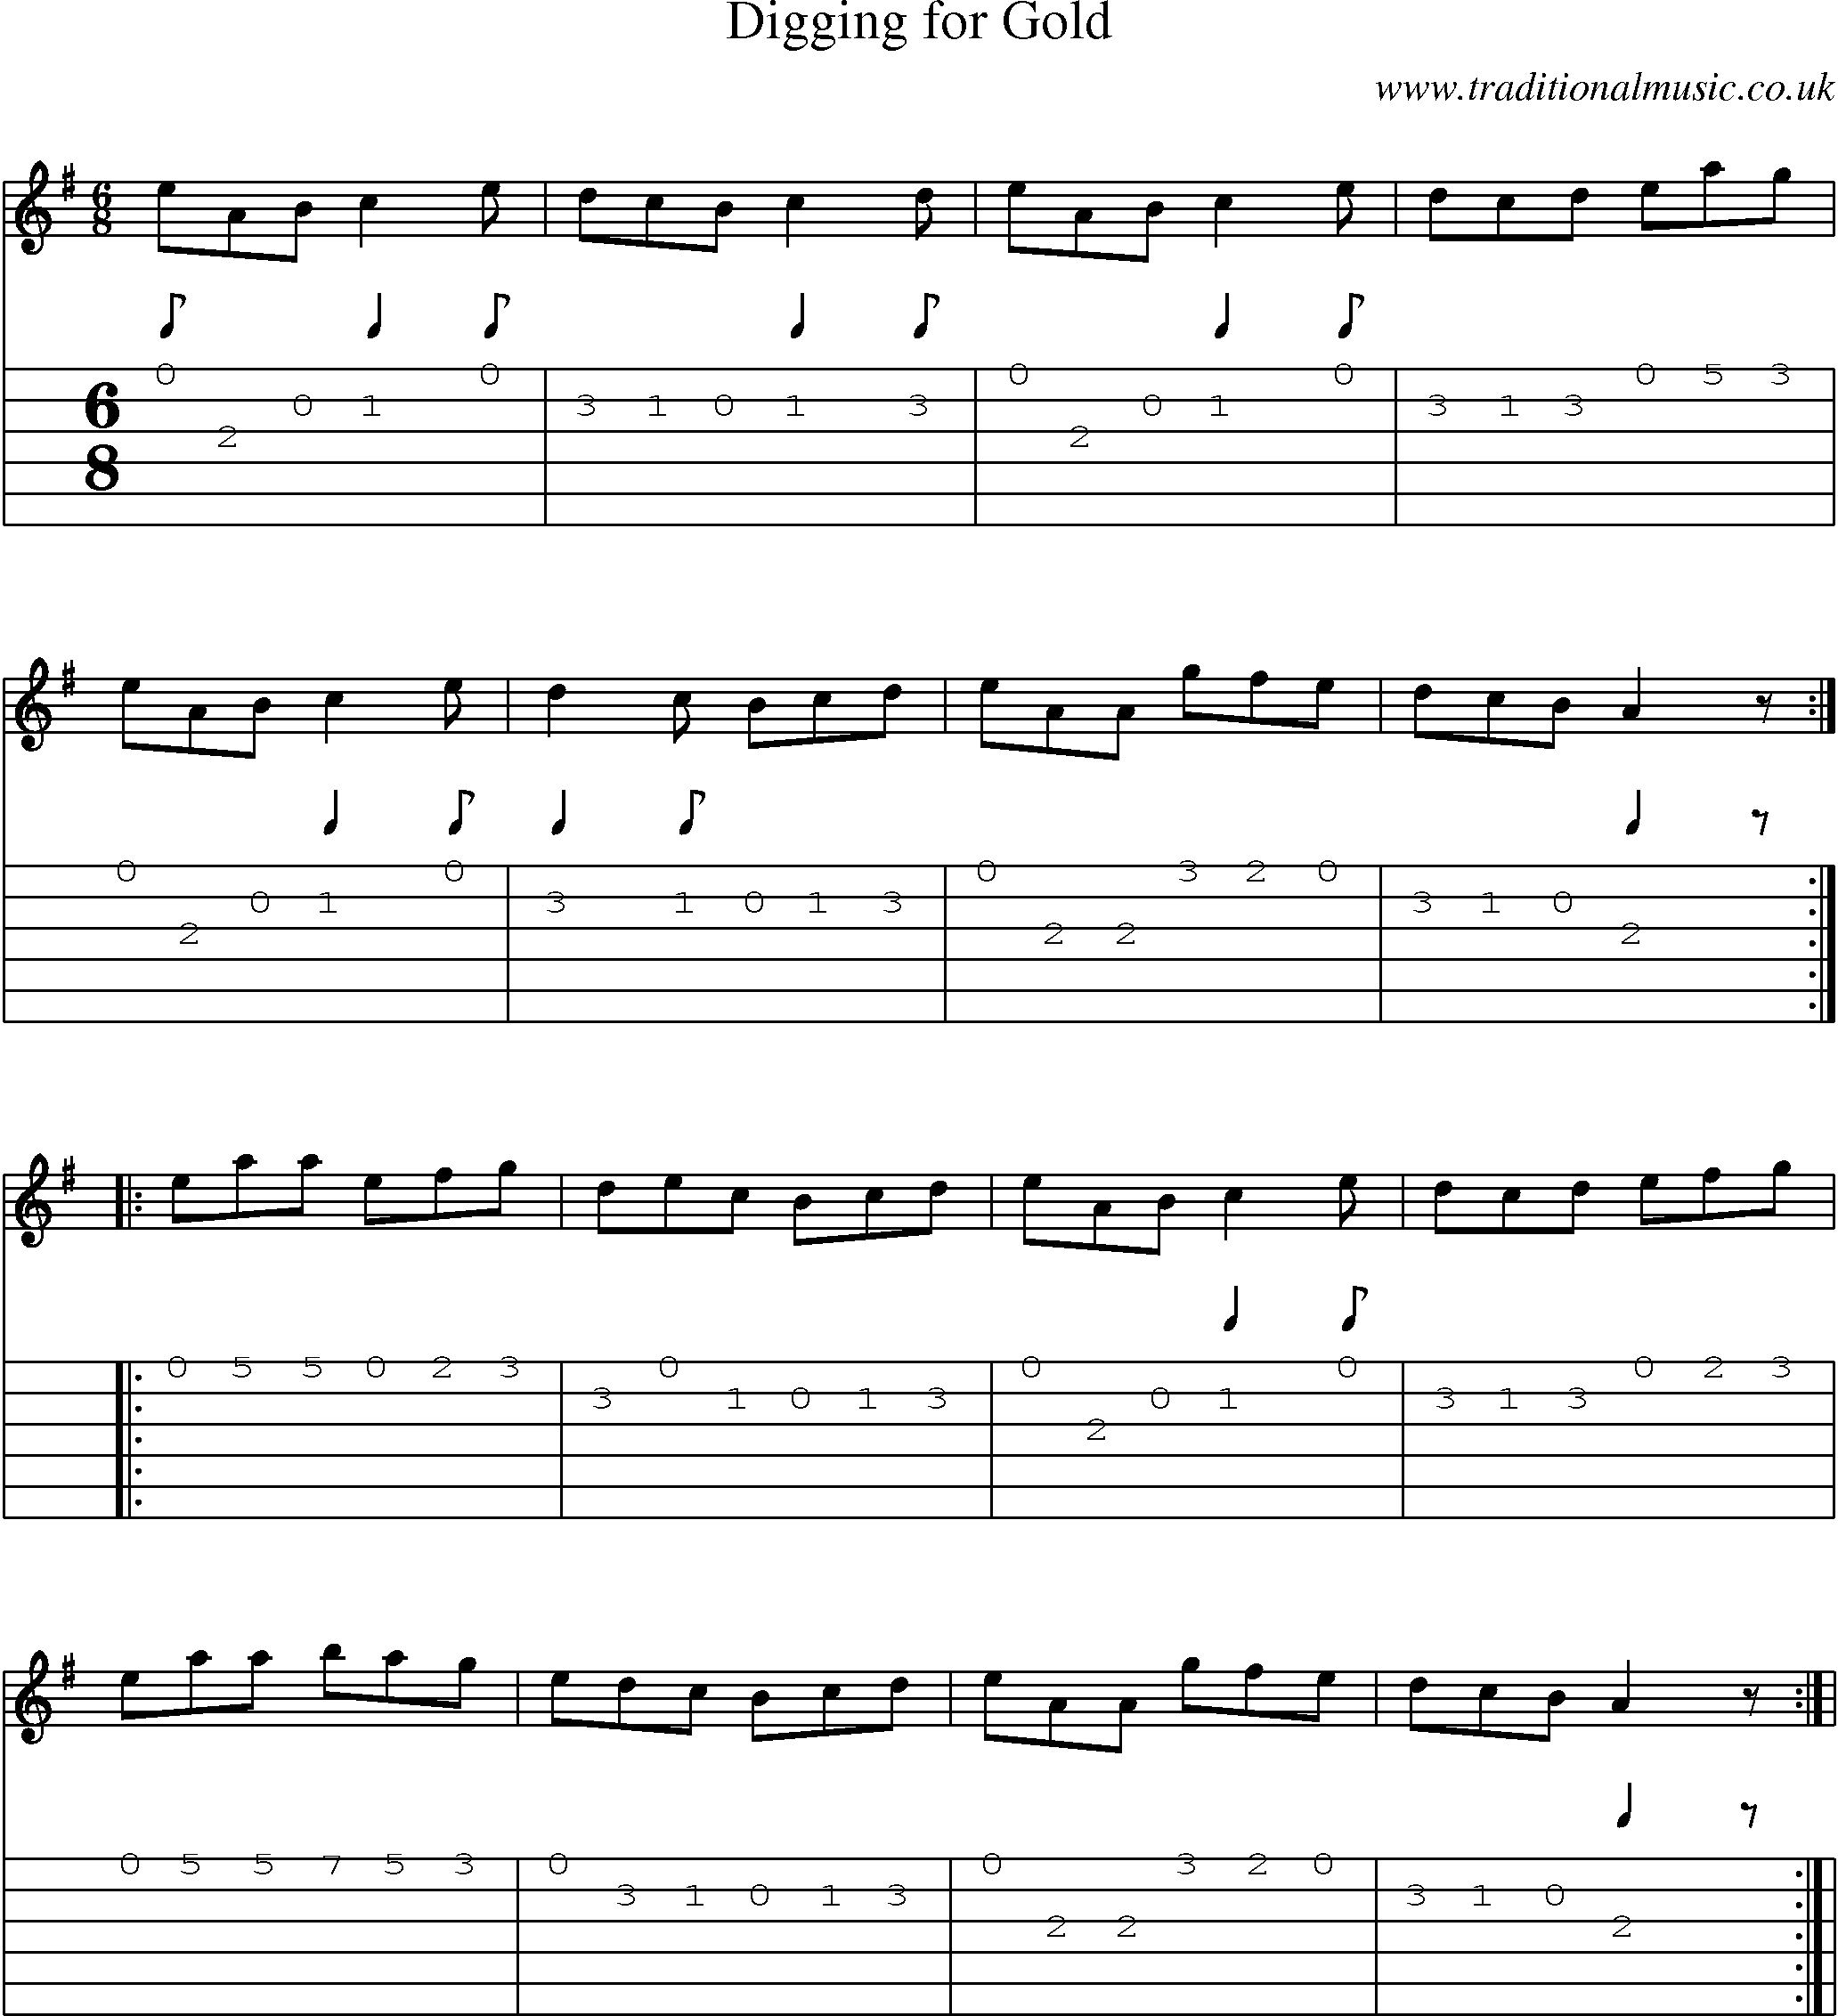 Music Score and Guitar Tabs for Digging For Gold